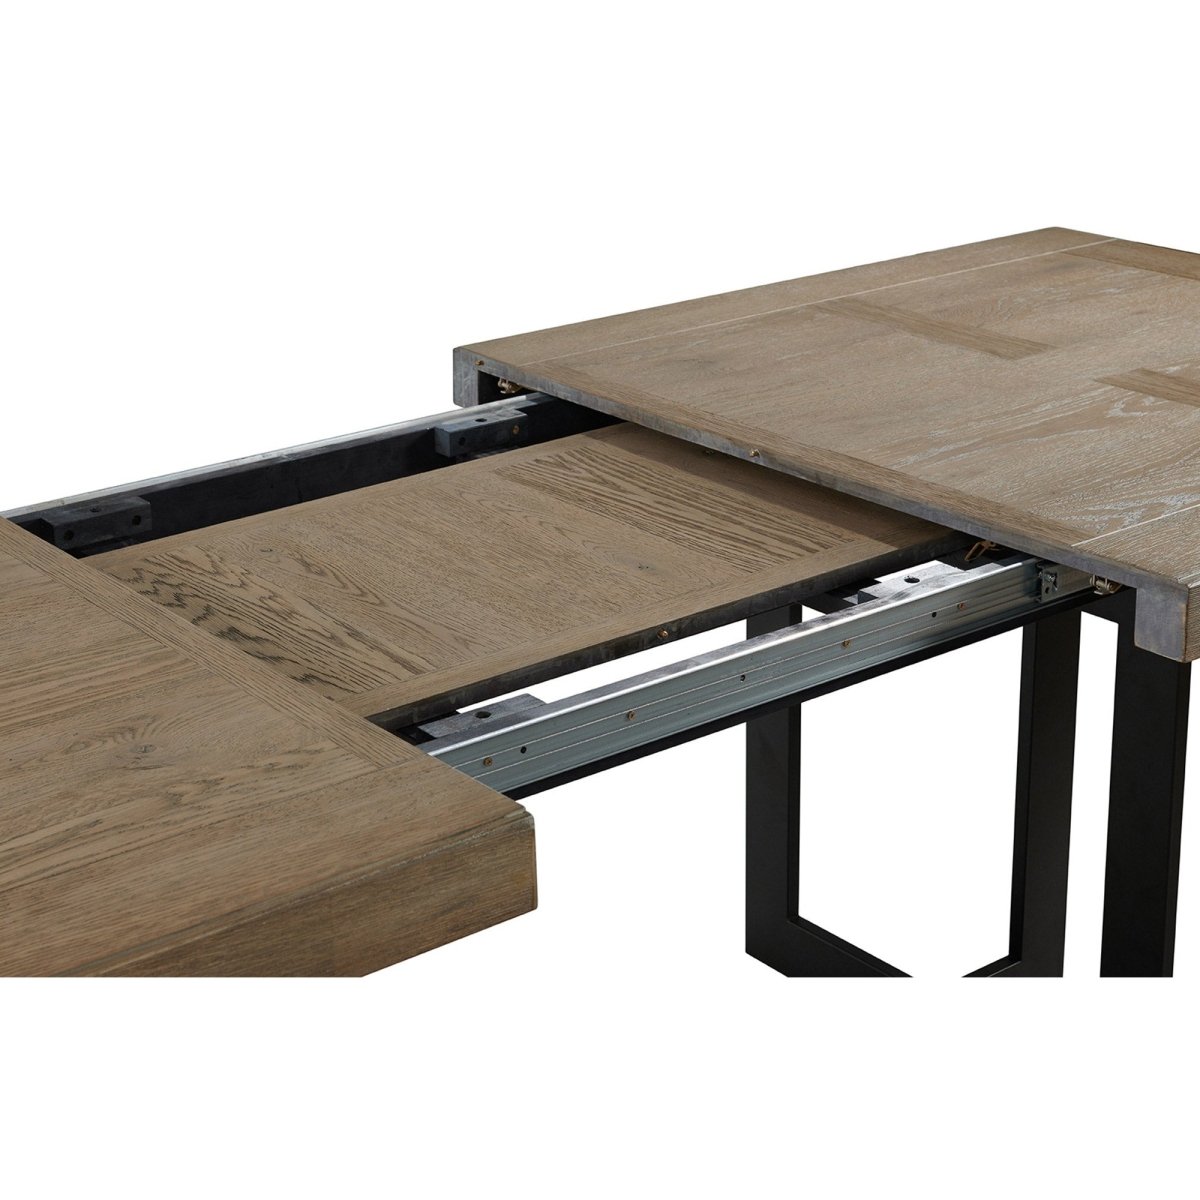 Stone Harbor Dining Table Collection - Alpine Outlets